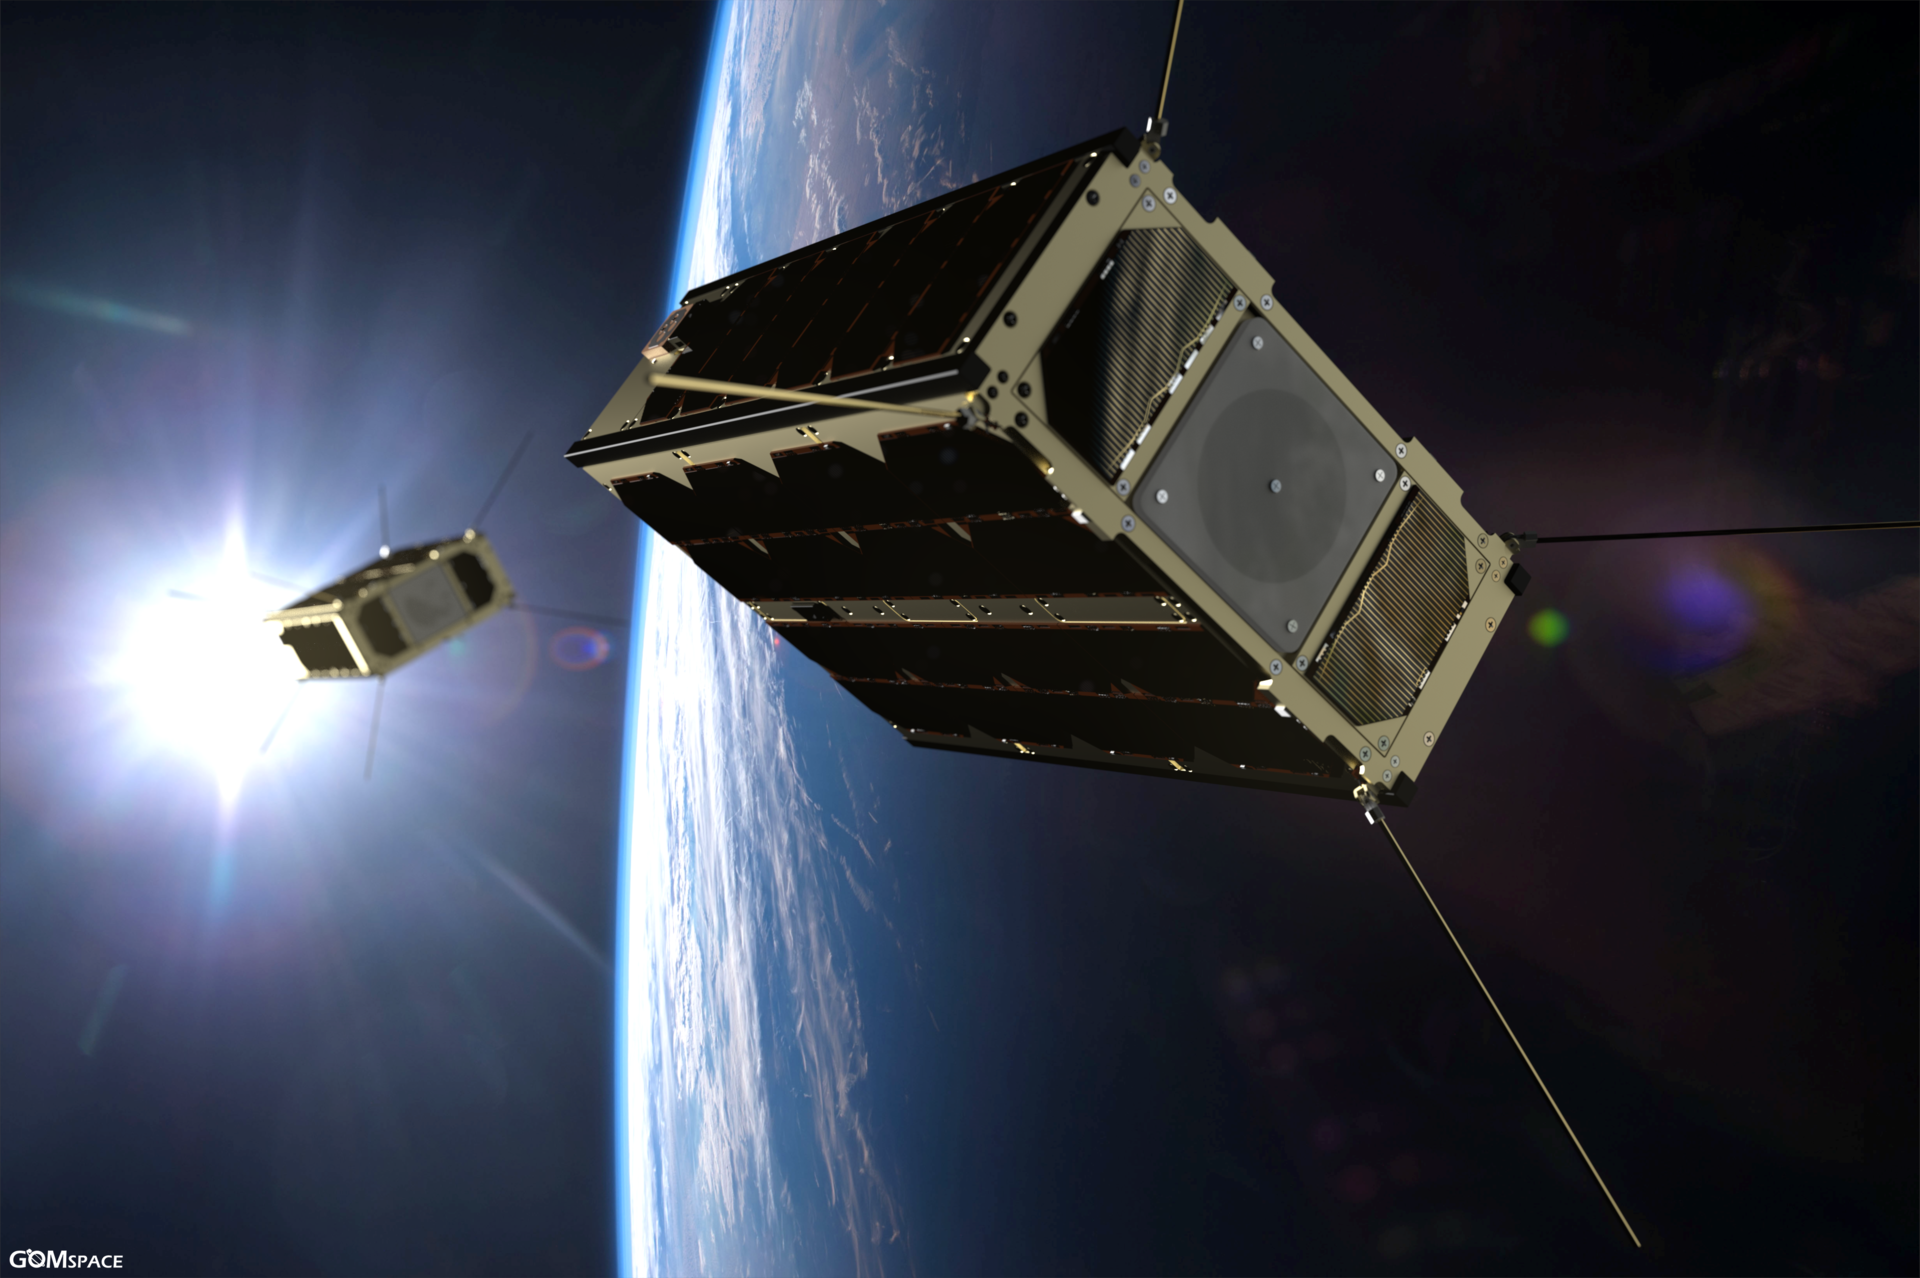 CubeSats working as a team